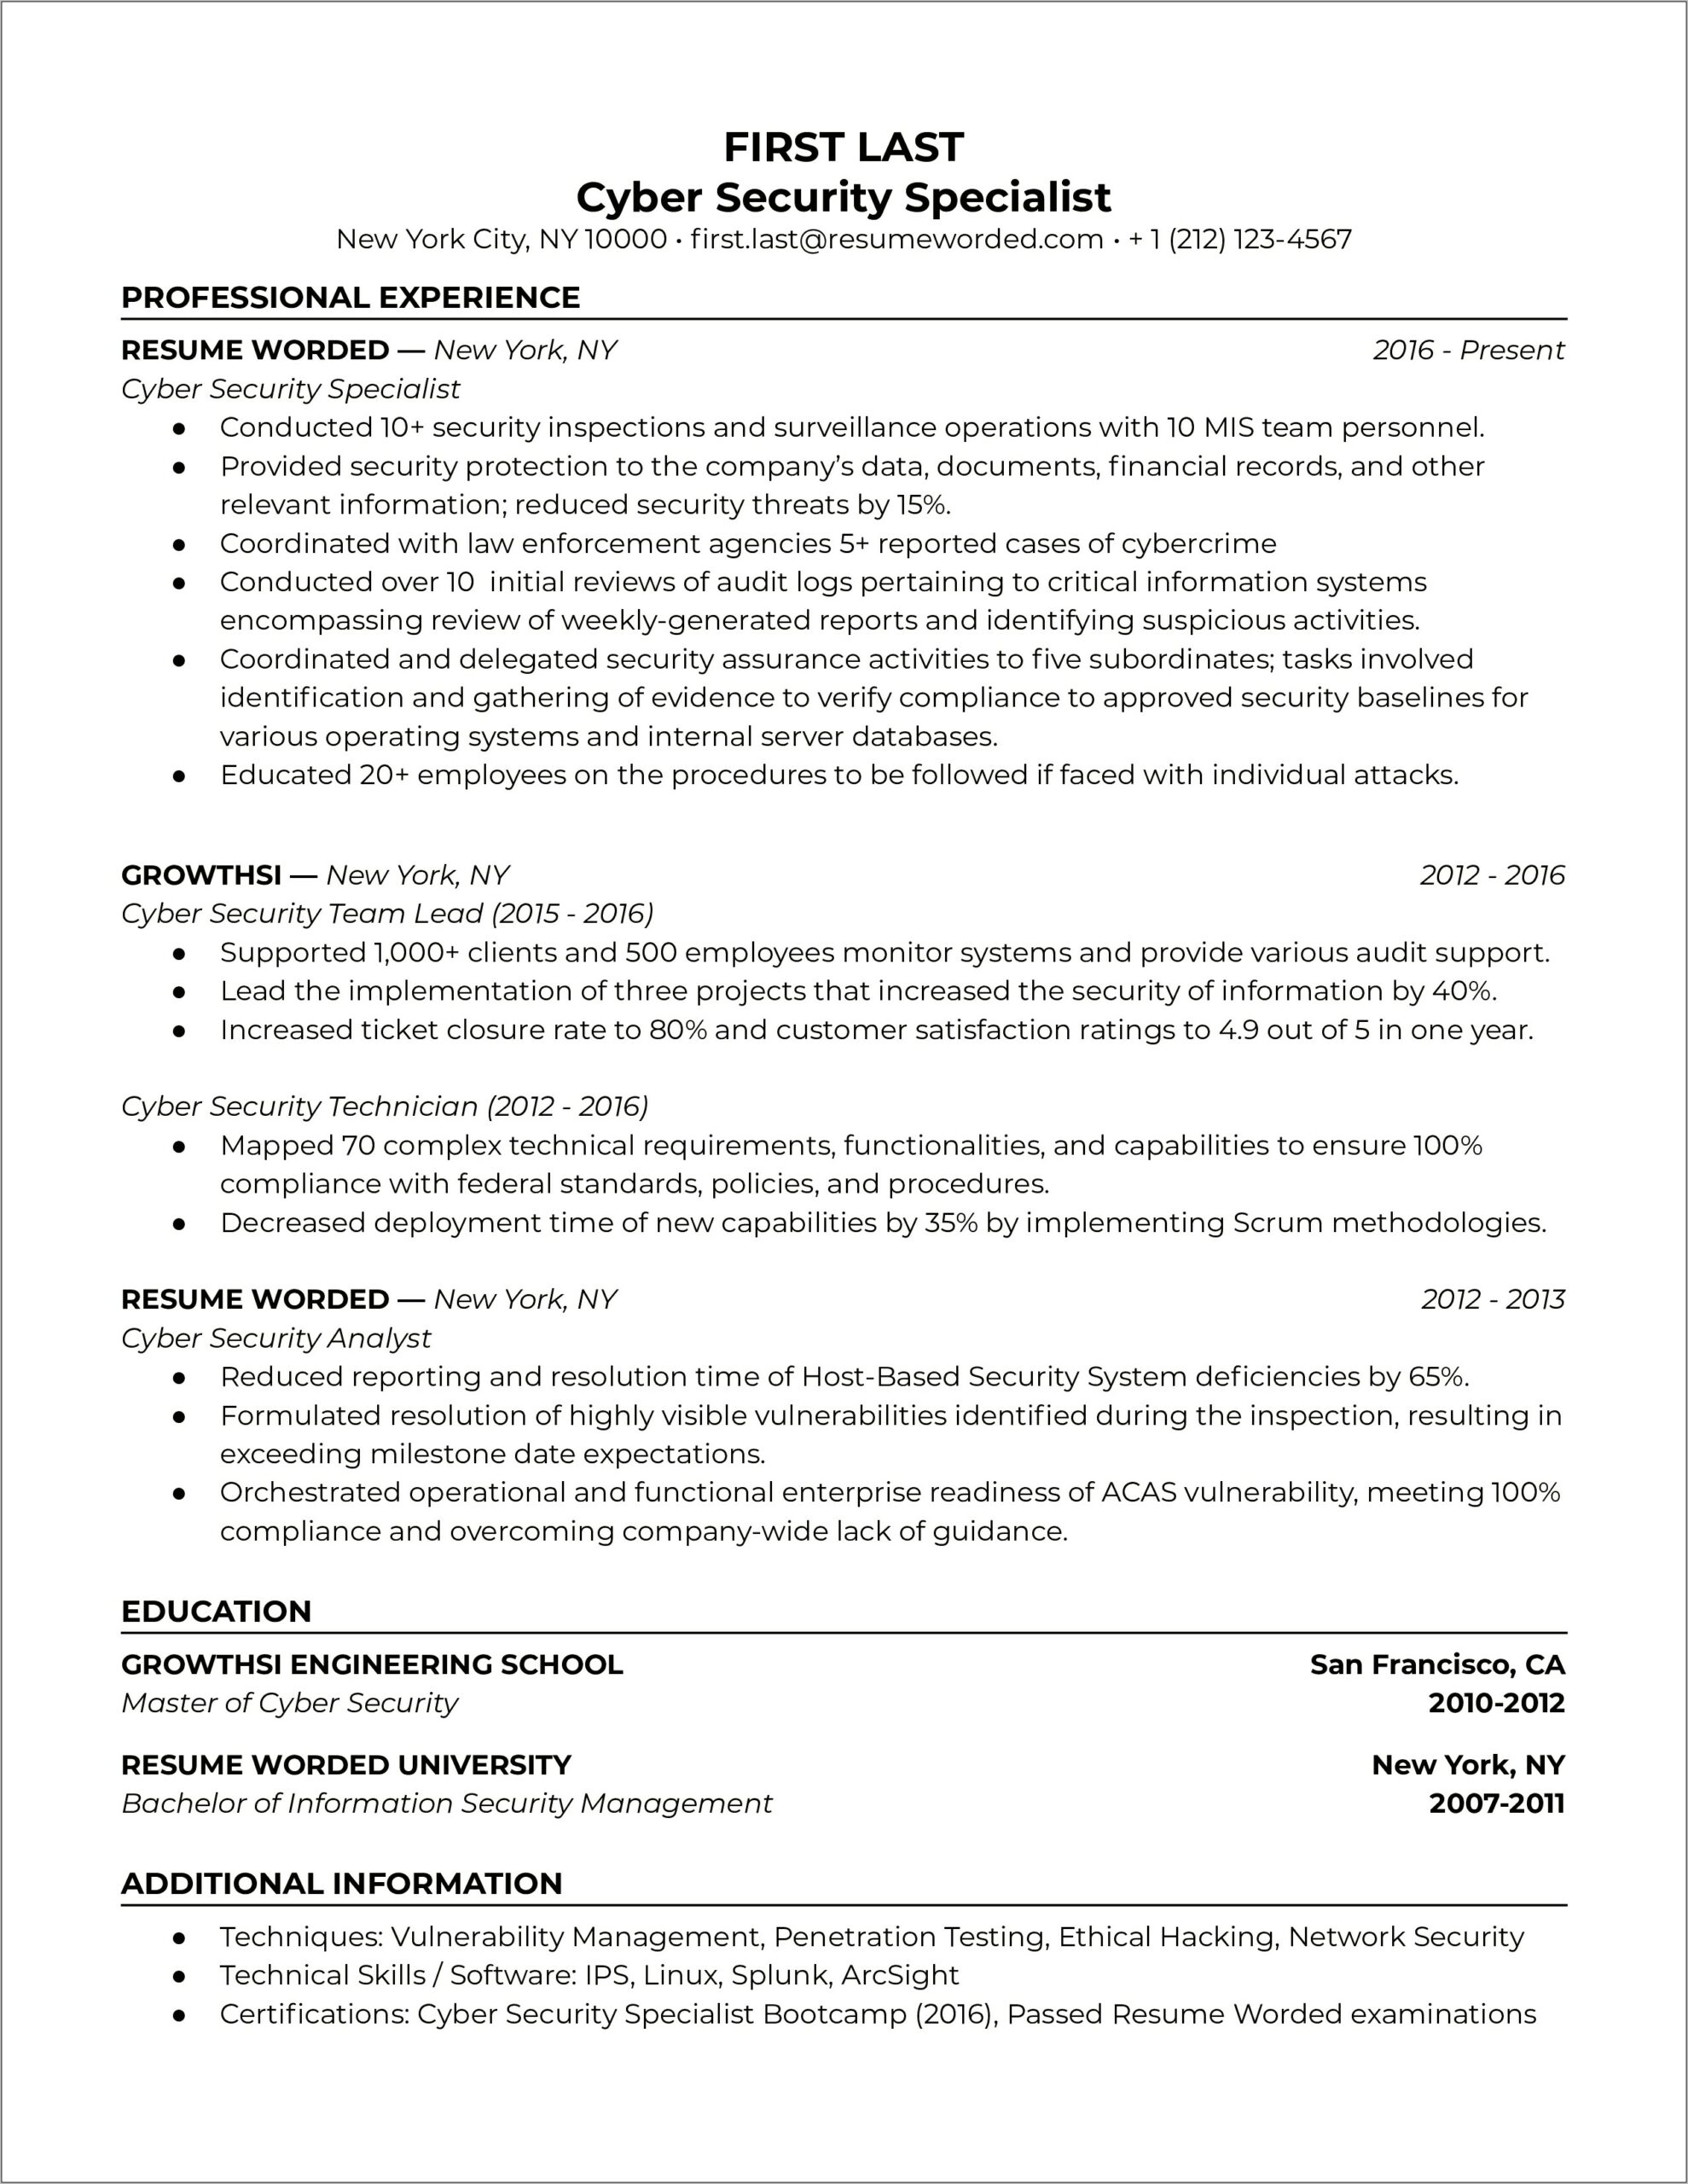 Sample Resume For Training And Development Specialist Pdf